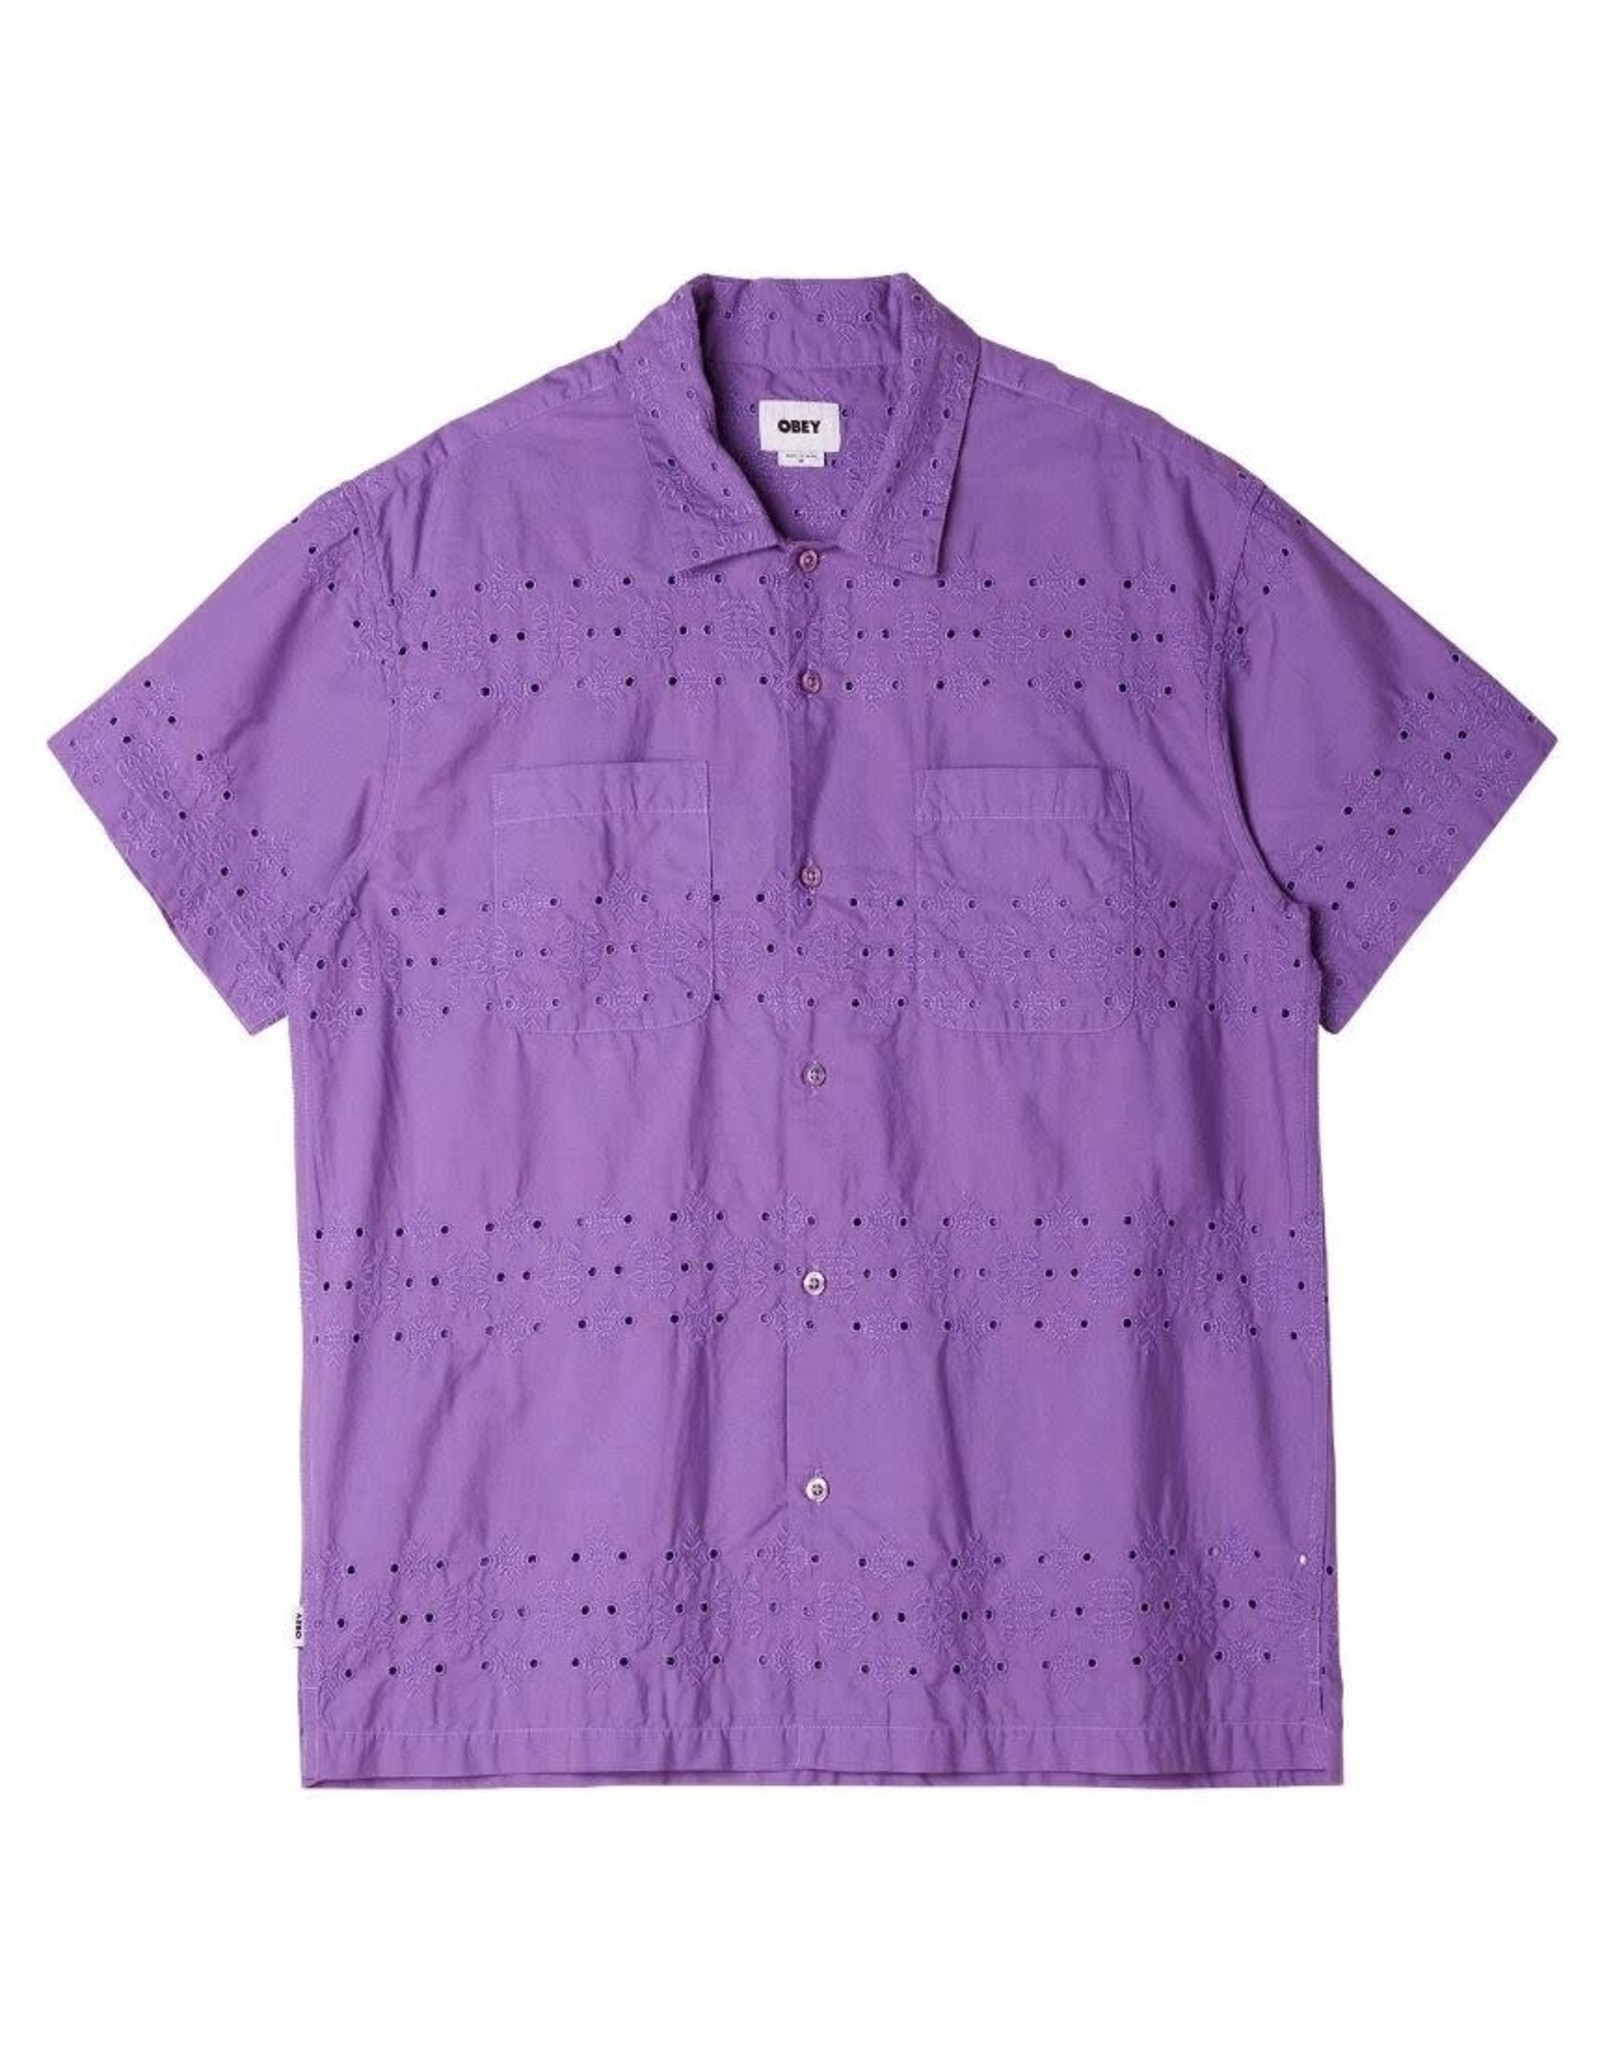 OBEY Psalm Woven SS Button Up